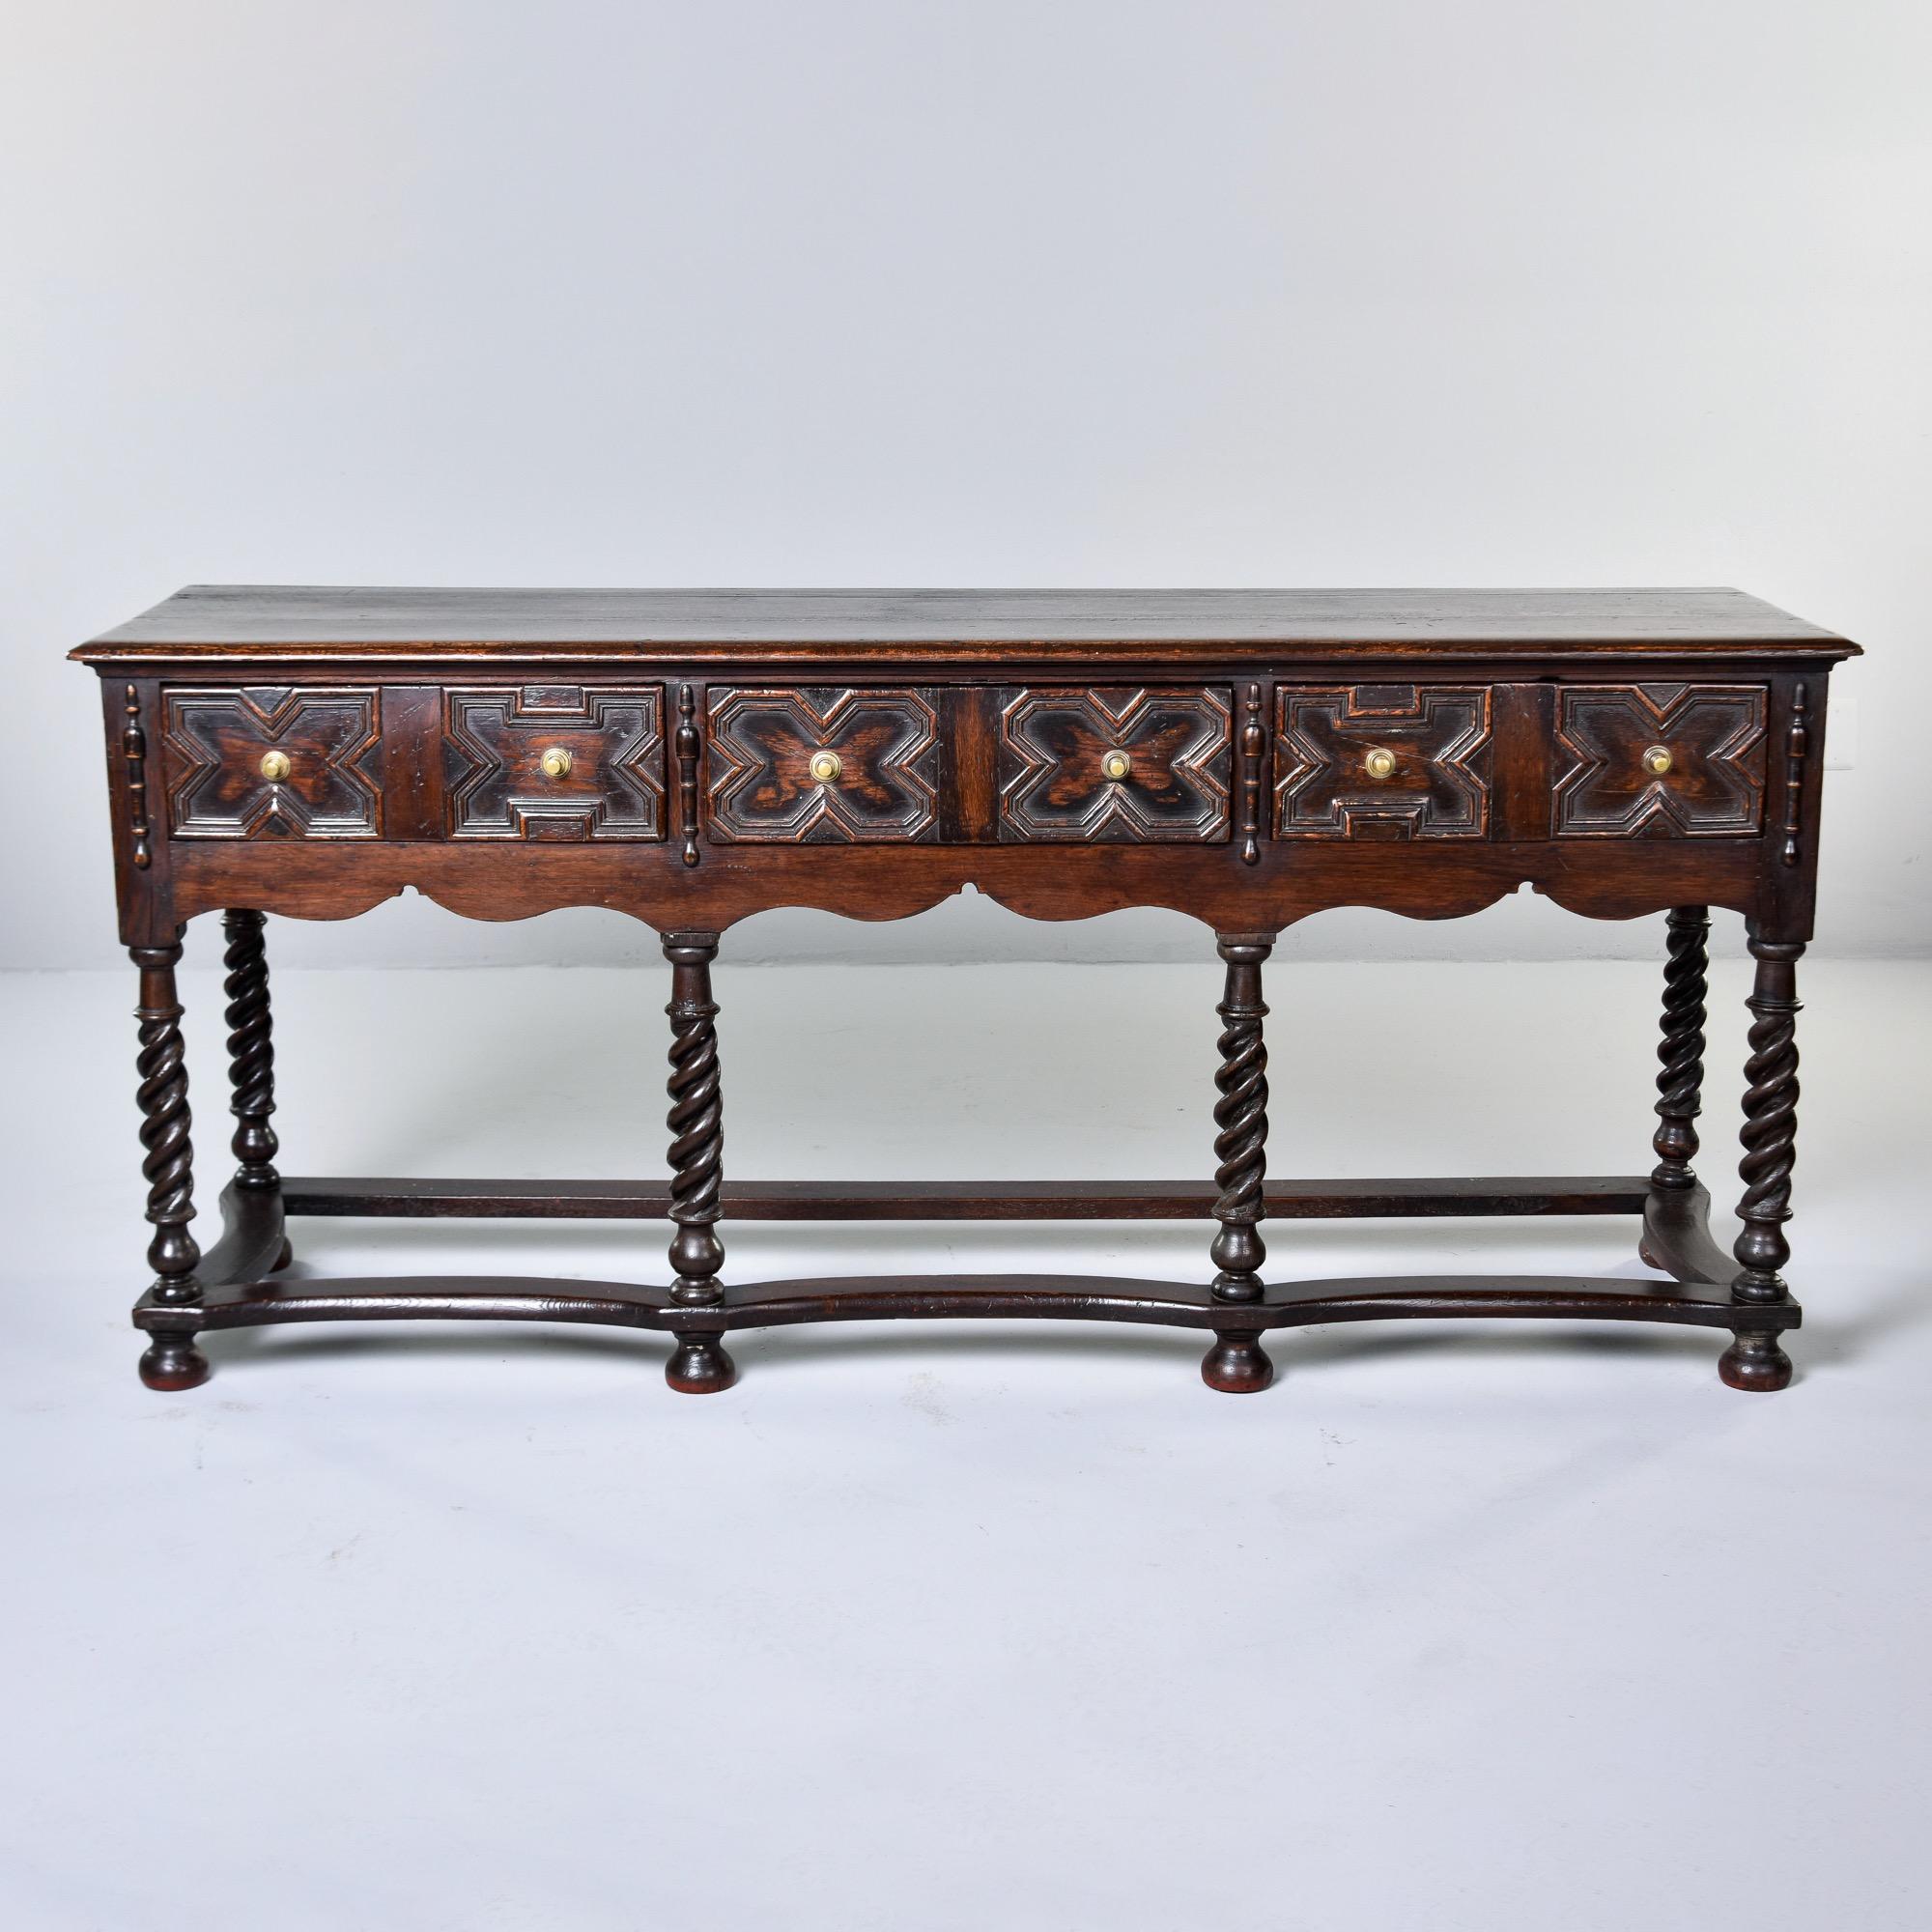 Found in England, this gothic style carved oak dresser base dates from the 1880s. Dark stained oak piece has eight hand carved, thickly twisted legs joined by stretchers at the base. Three functional drawers on the top with x-form carved details on